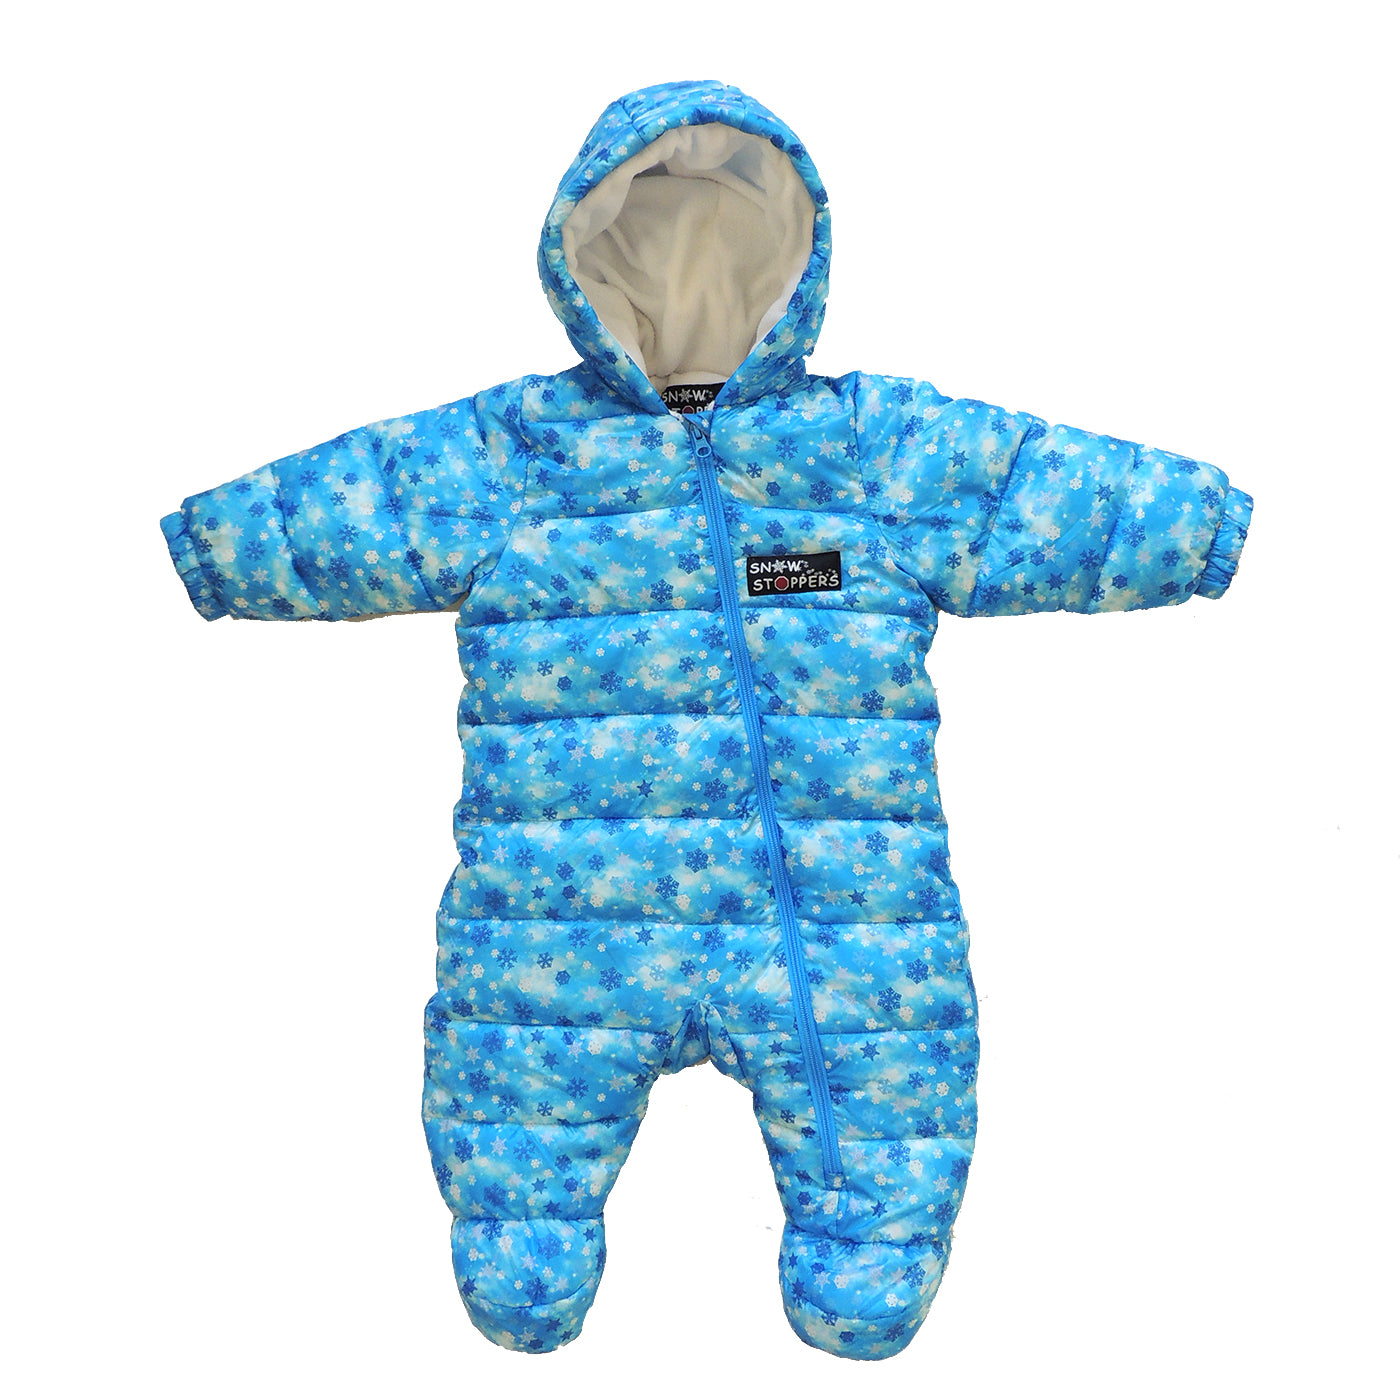 One Piece Snow Suits (Infant/Toddler)